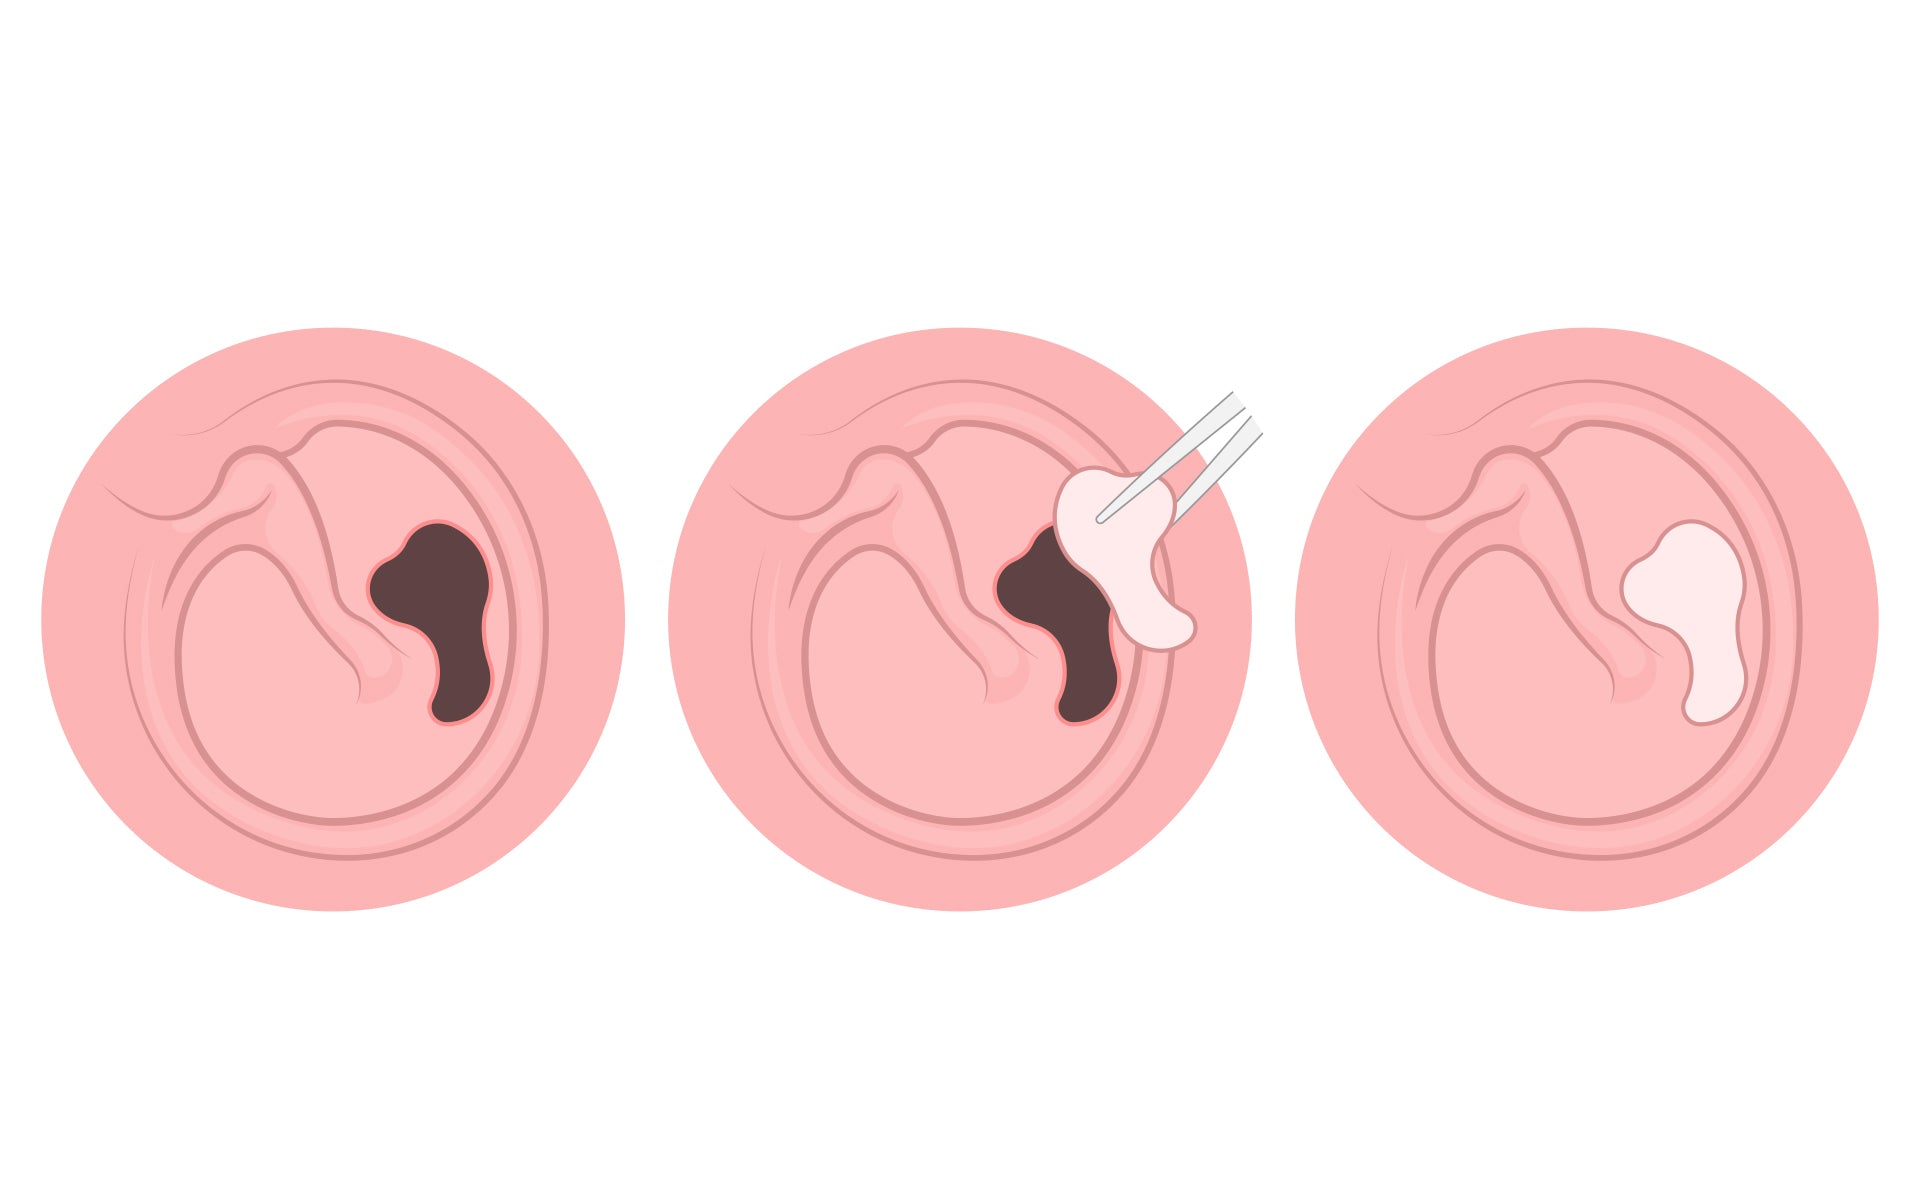 This is what you need to know about perforated eardrum